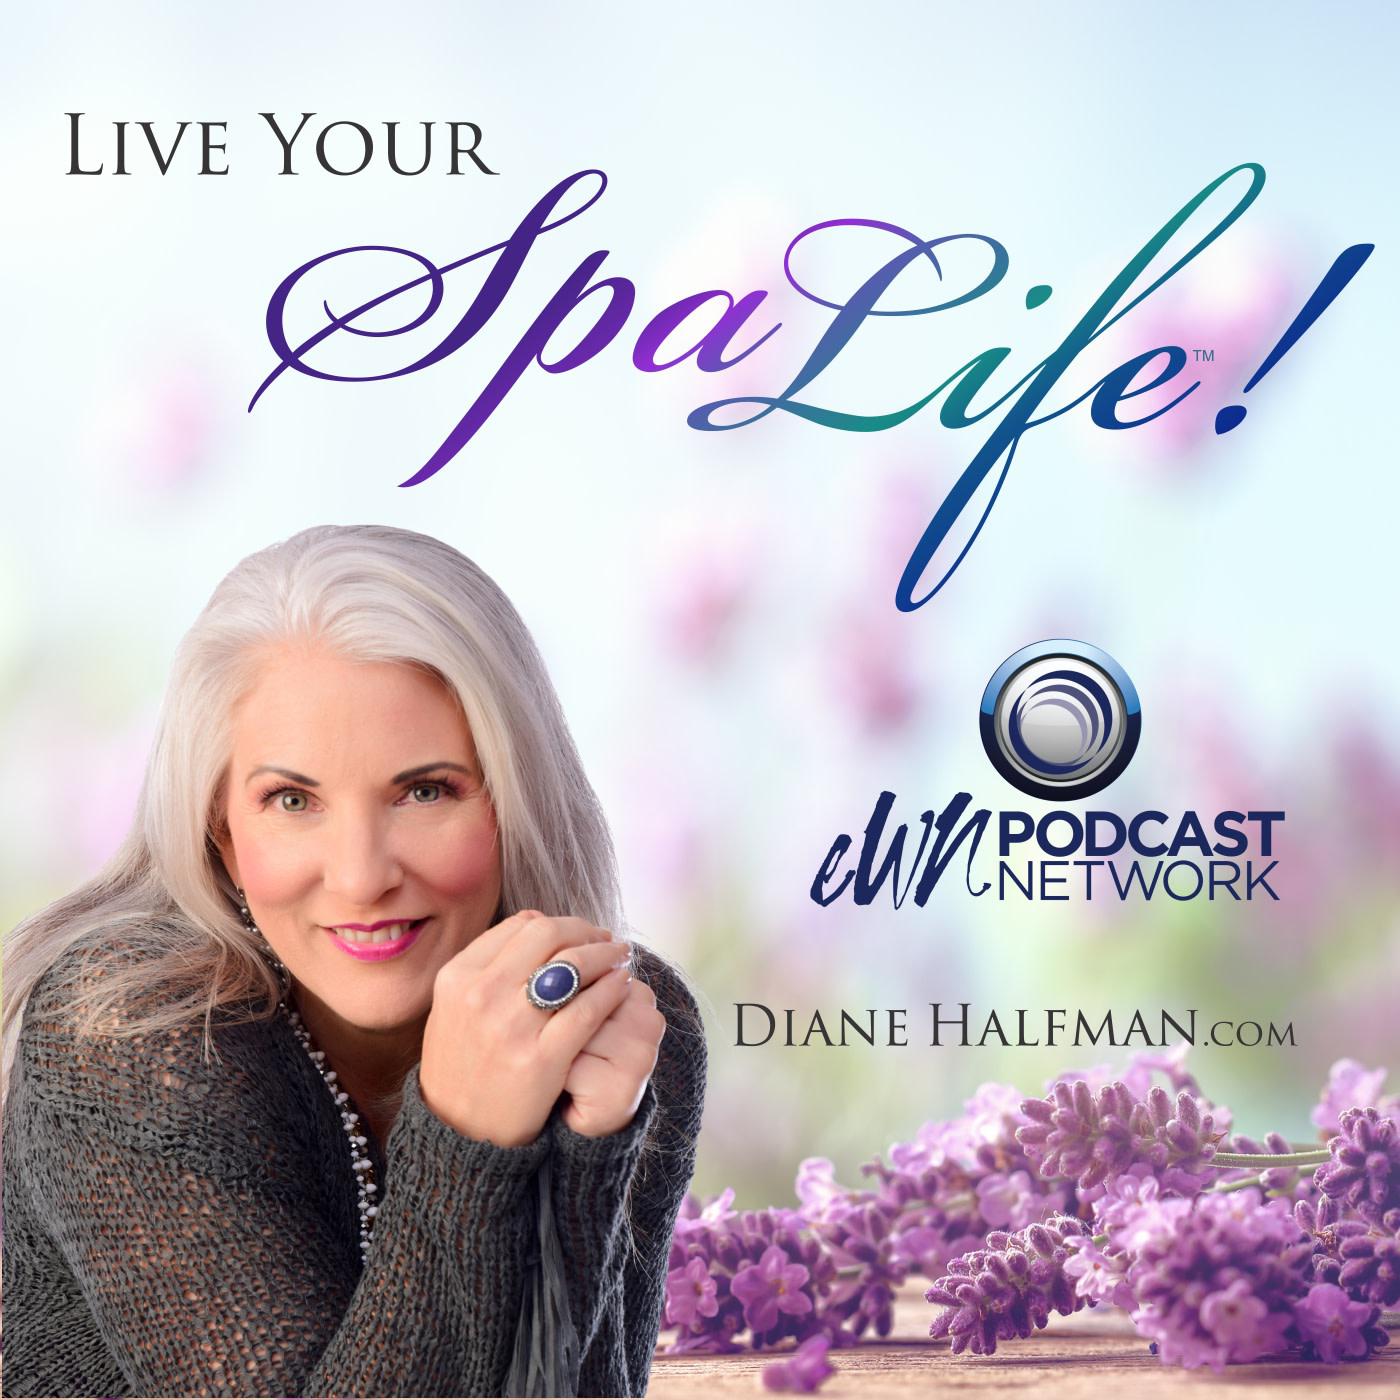 Live your SpaLife host Diane Halfman interviews Kristi Wells on the growth of Safe House Project